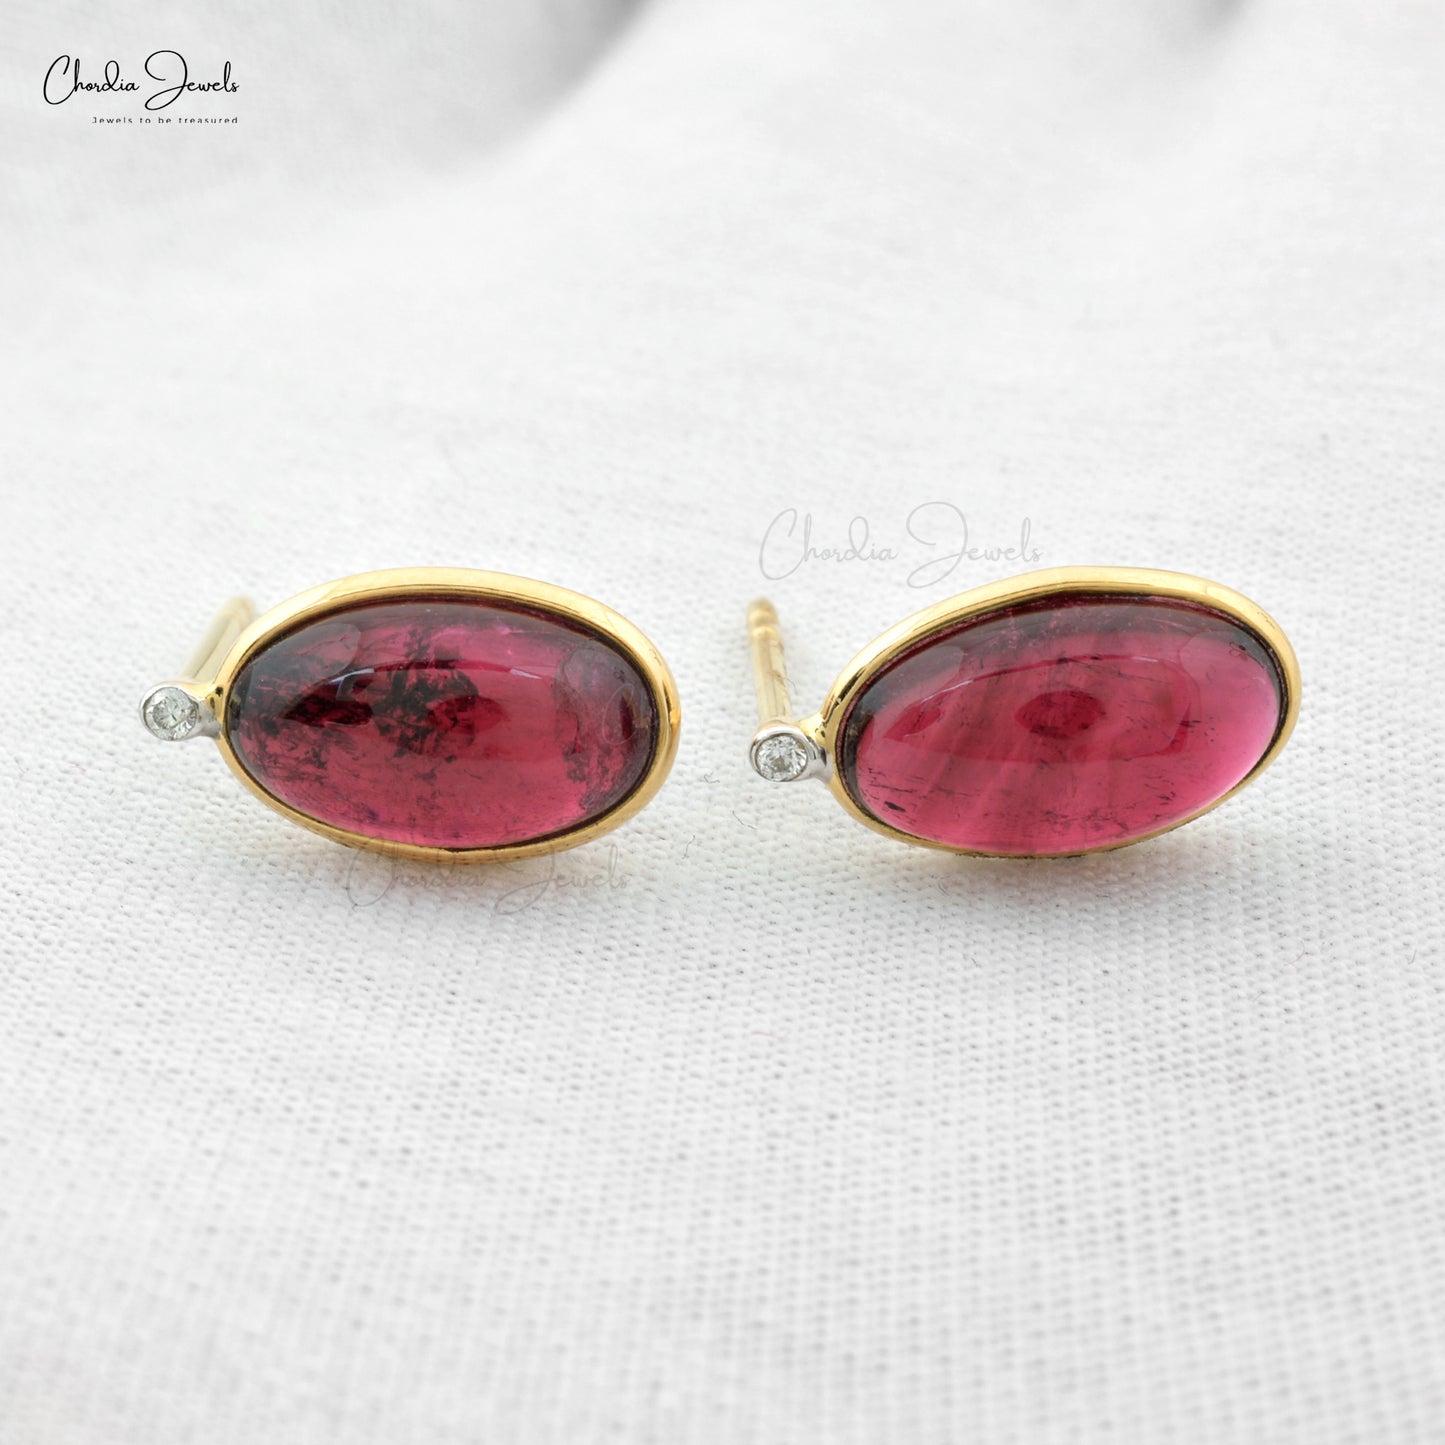 Natural Pink Tourmaline Studs Earrings 12x7mm Oval cabochon Gemstone Studs Earring 14k Yellow Gold Diamond Studs For Her